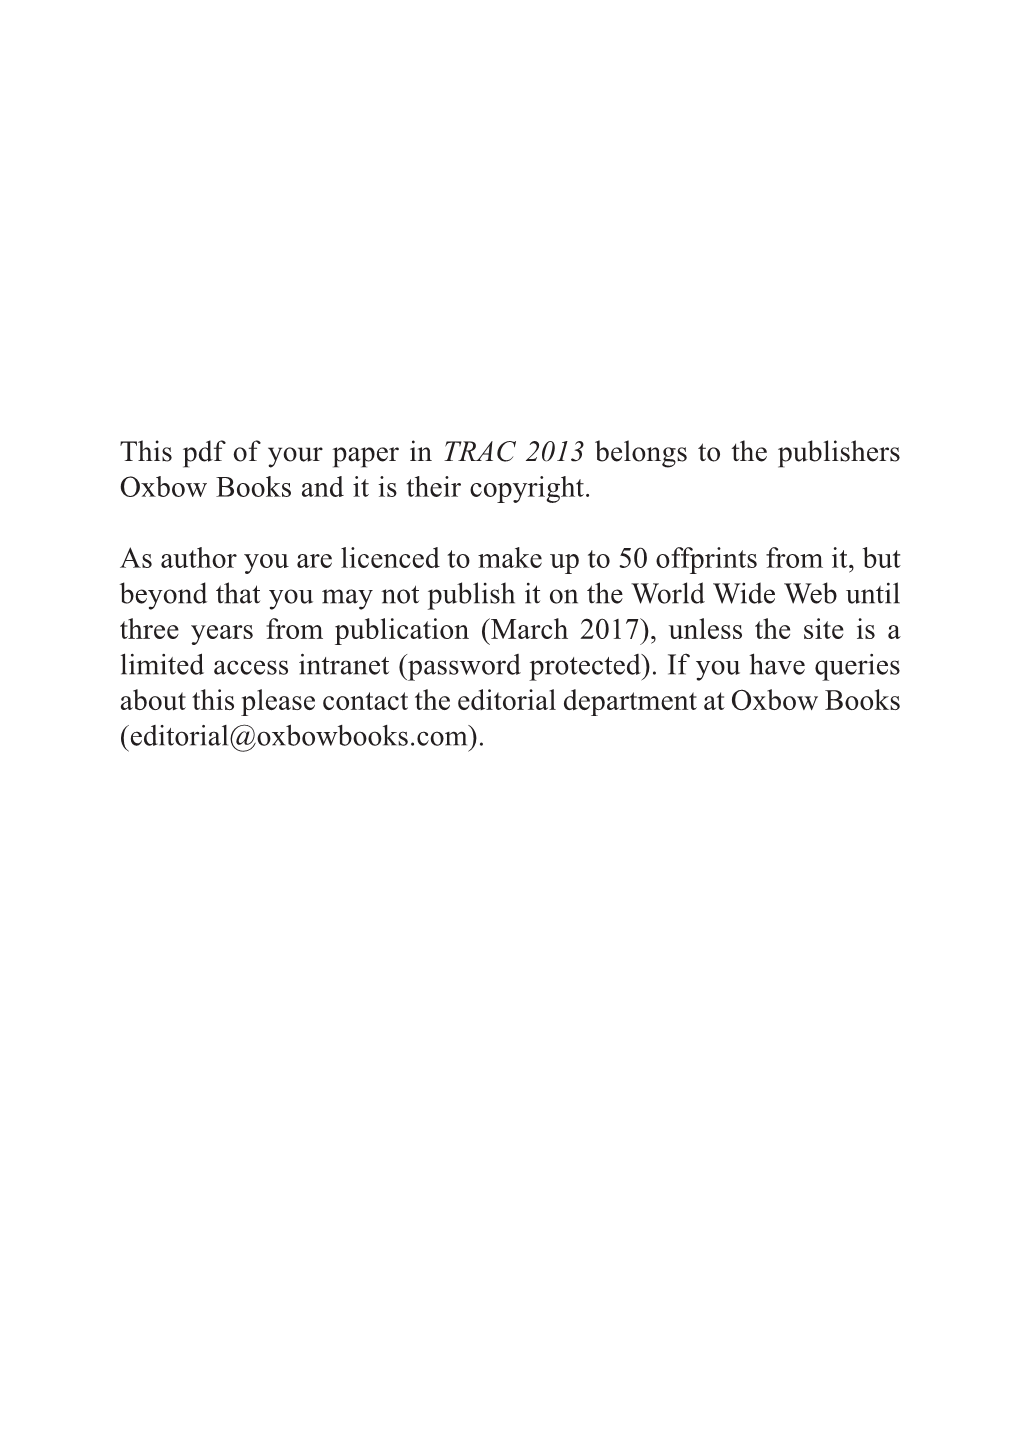 This Pdf of Your Paper in TRAC 2013 Belongs to the Publishers Oxbow Books and It Is Their Copyright